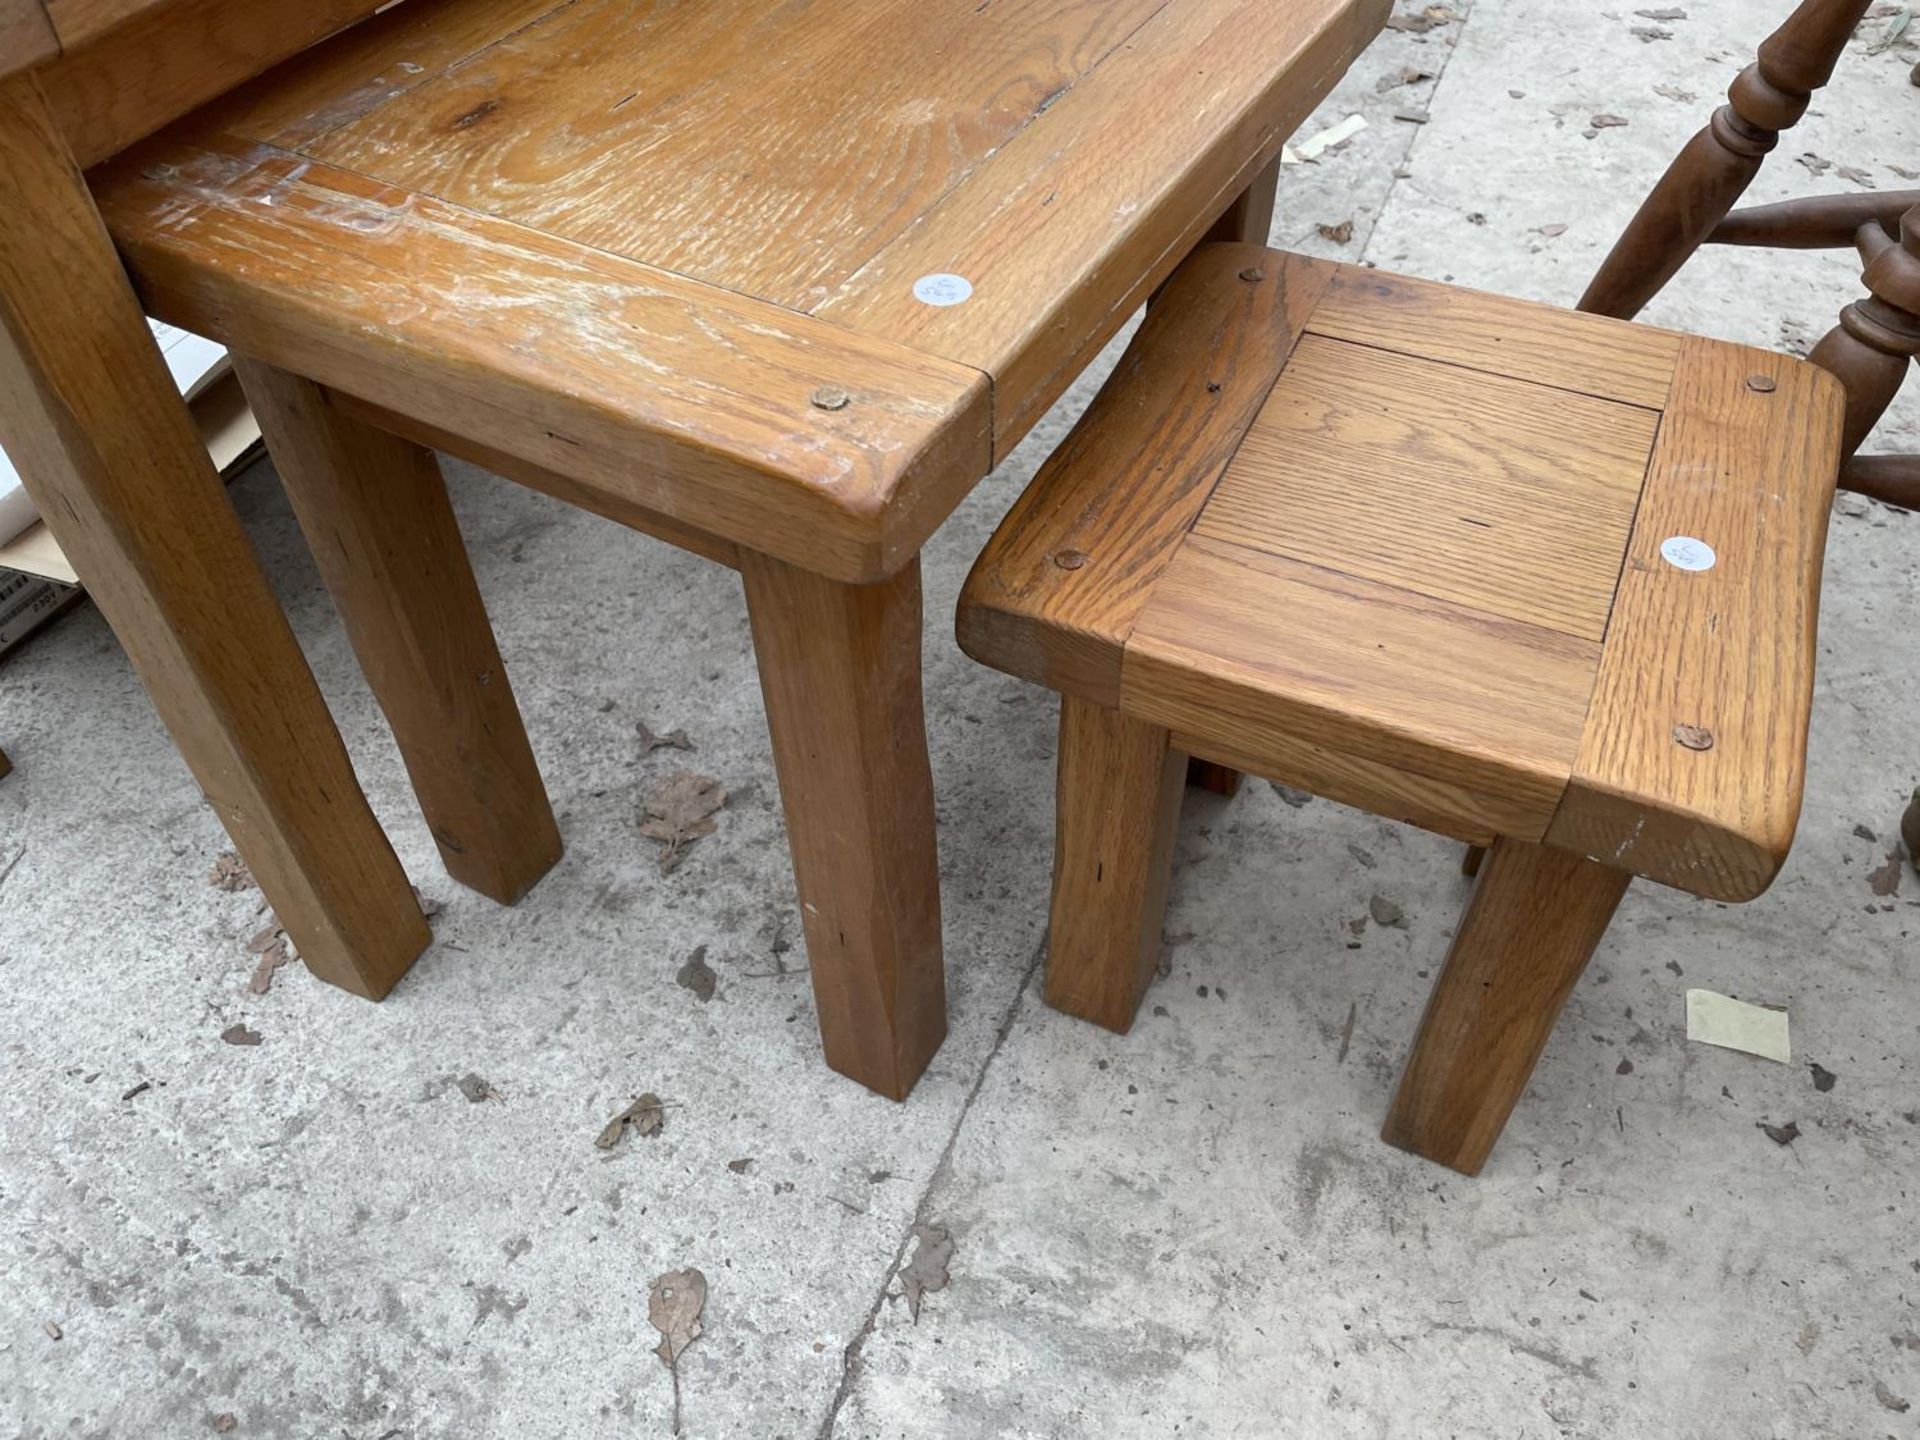 A MODERN OAK NEST OF THREE TABLES - Image 3 of 3